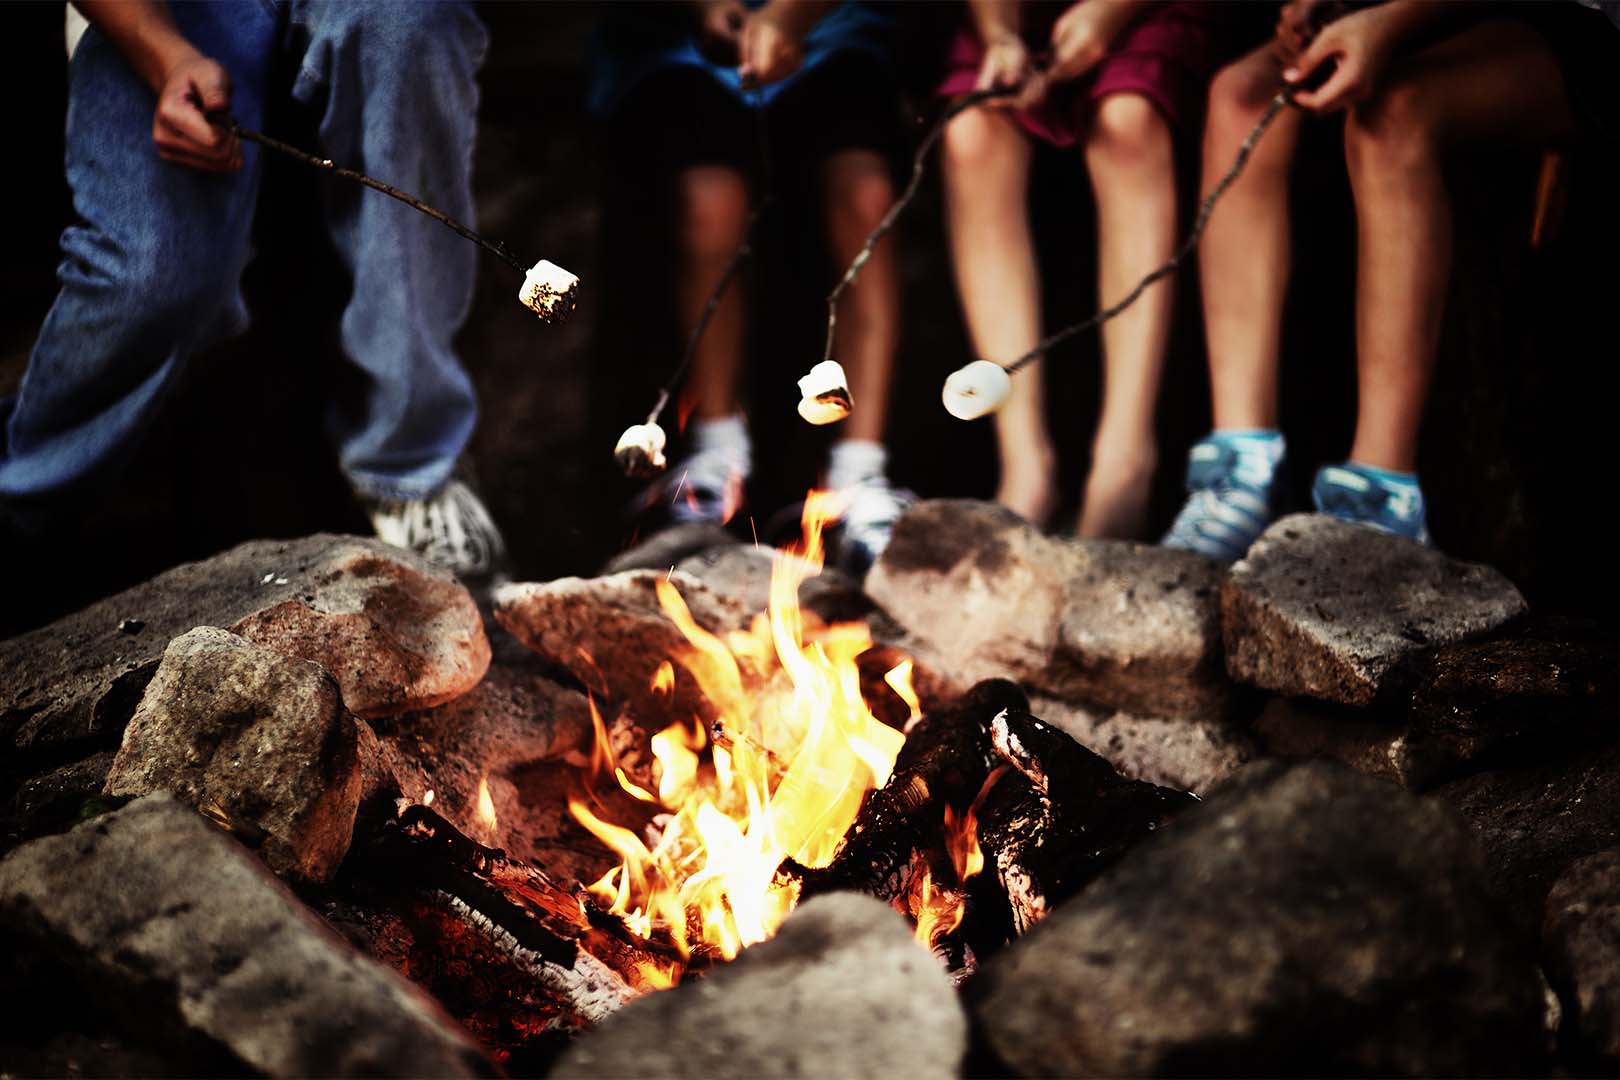 A group of people roasting marshmellows around a campfire.